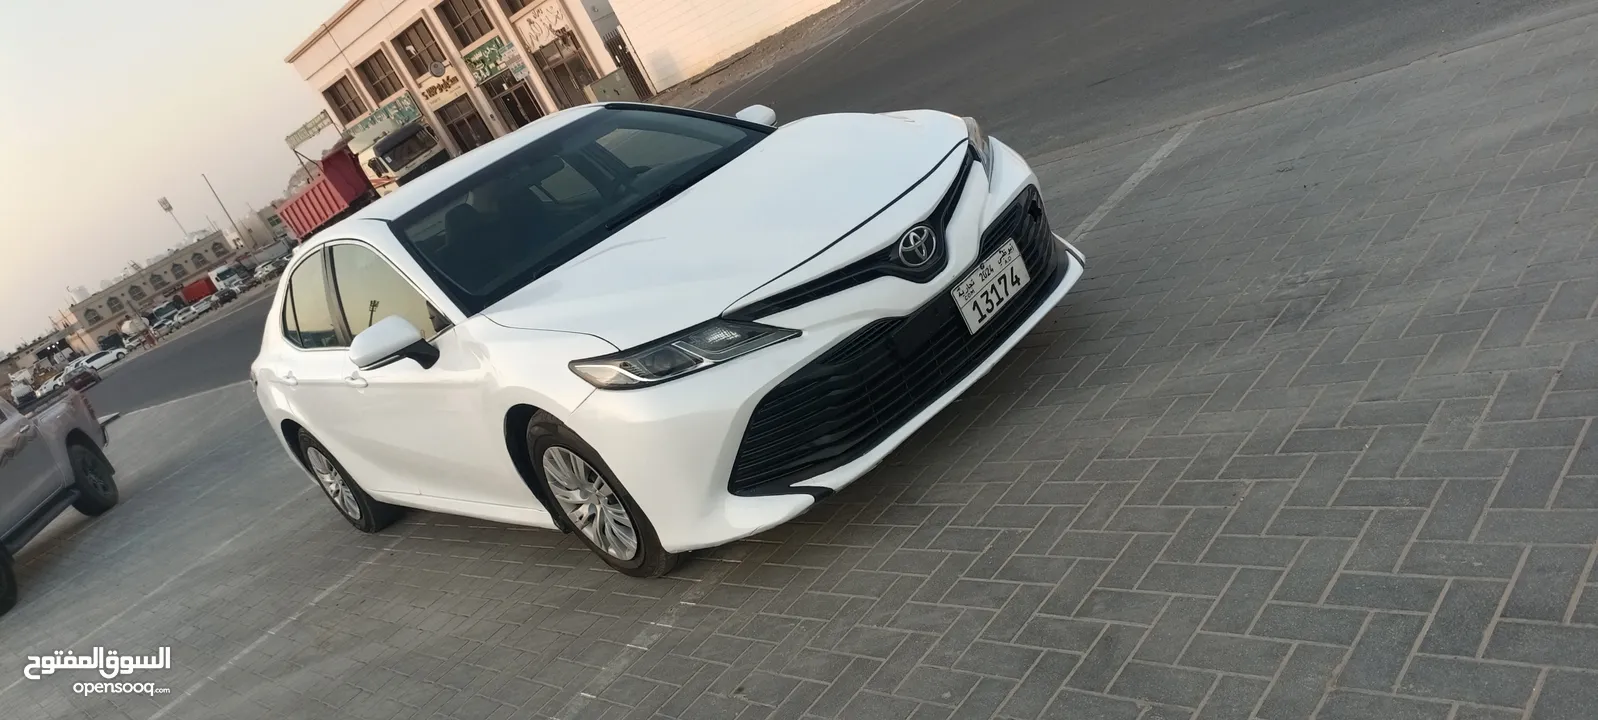 Toyota Camry 2018 rear camera everything thing is perfect no issues for sale location Al Ain